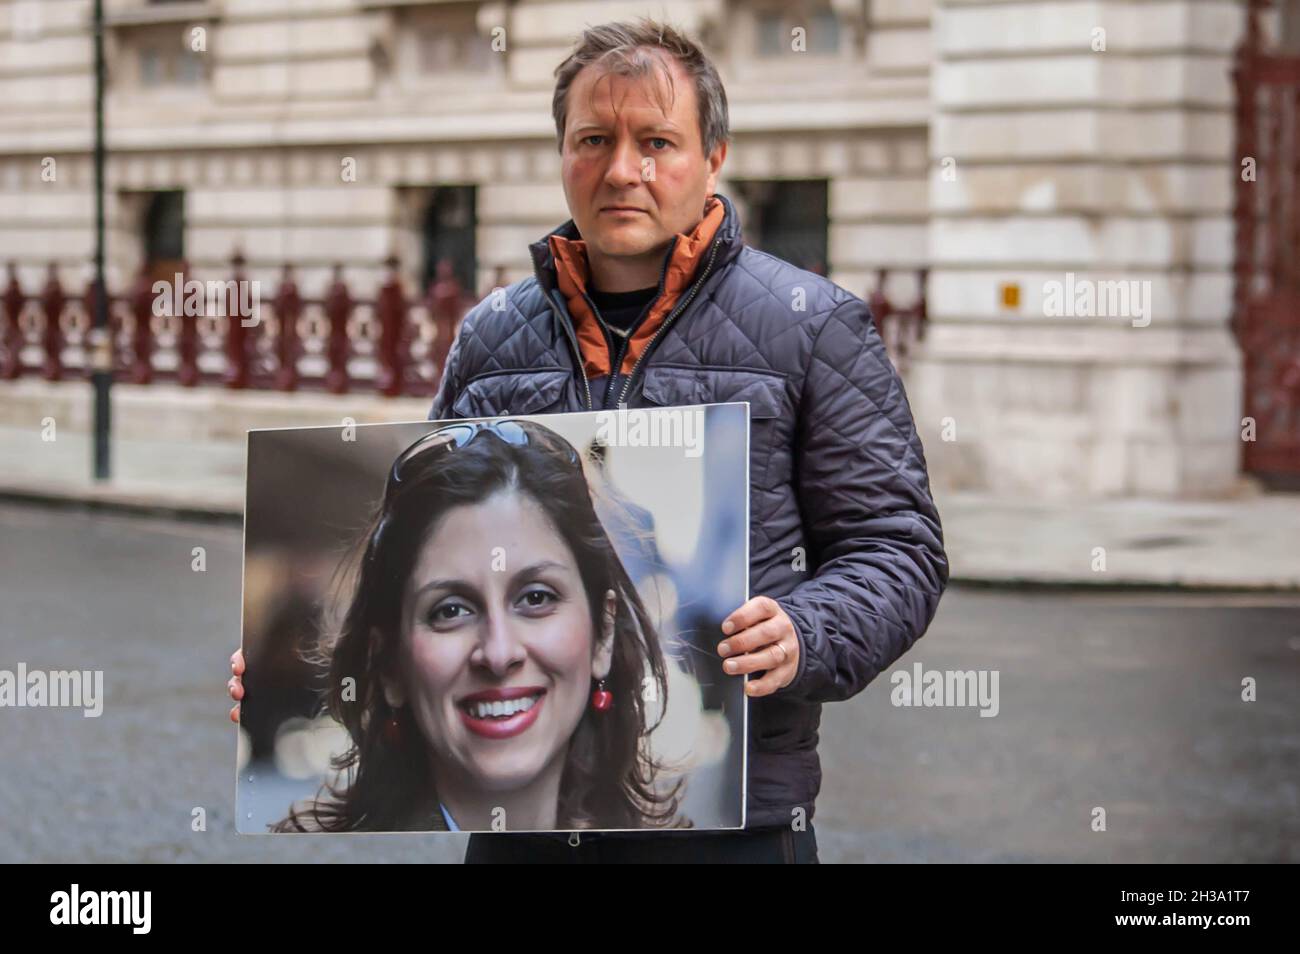 London, UK. 26th Oct, 2021. Richard Ratcliffe embarks on a hunger strike outside the Foreign Office in aid of his Free Nazanin campaign. Credit: Jessica Girvan/Alamy Live News Stock Photo